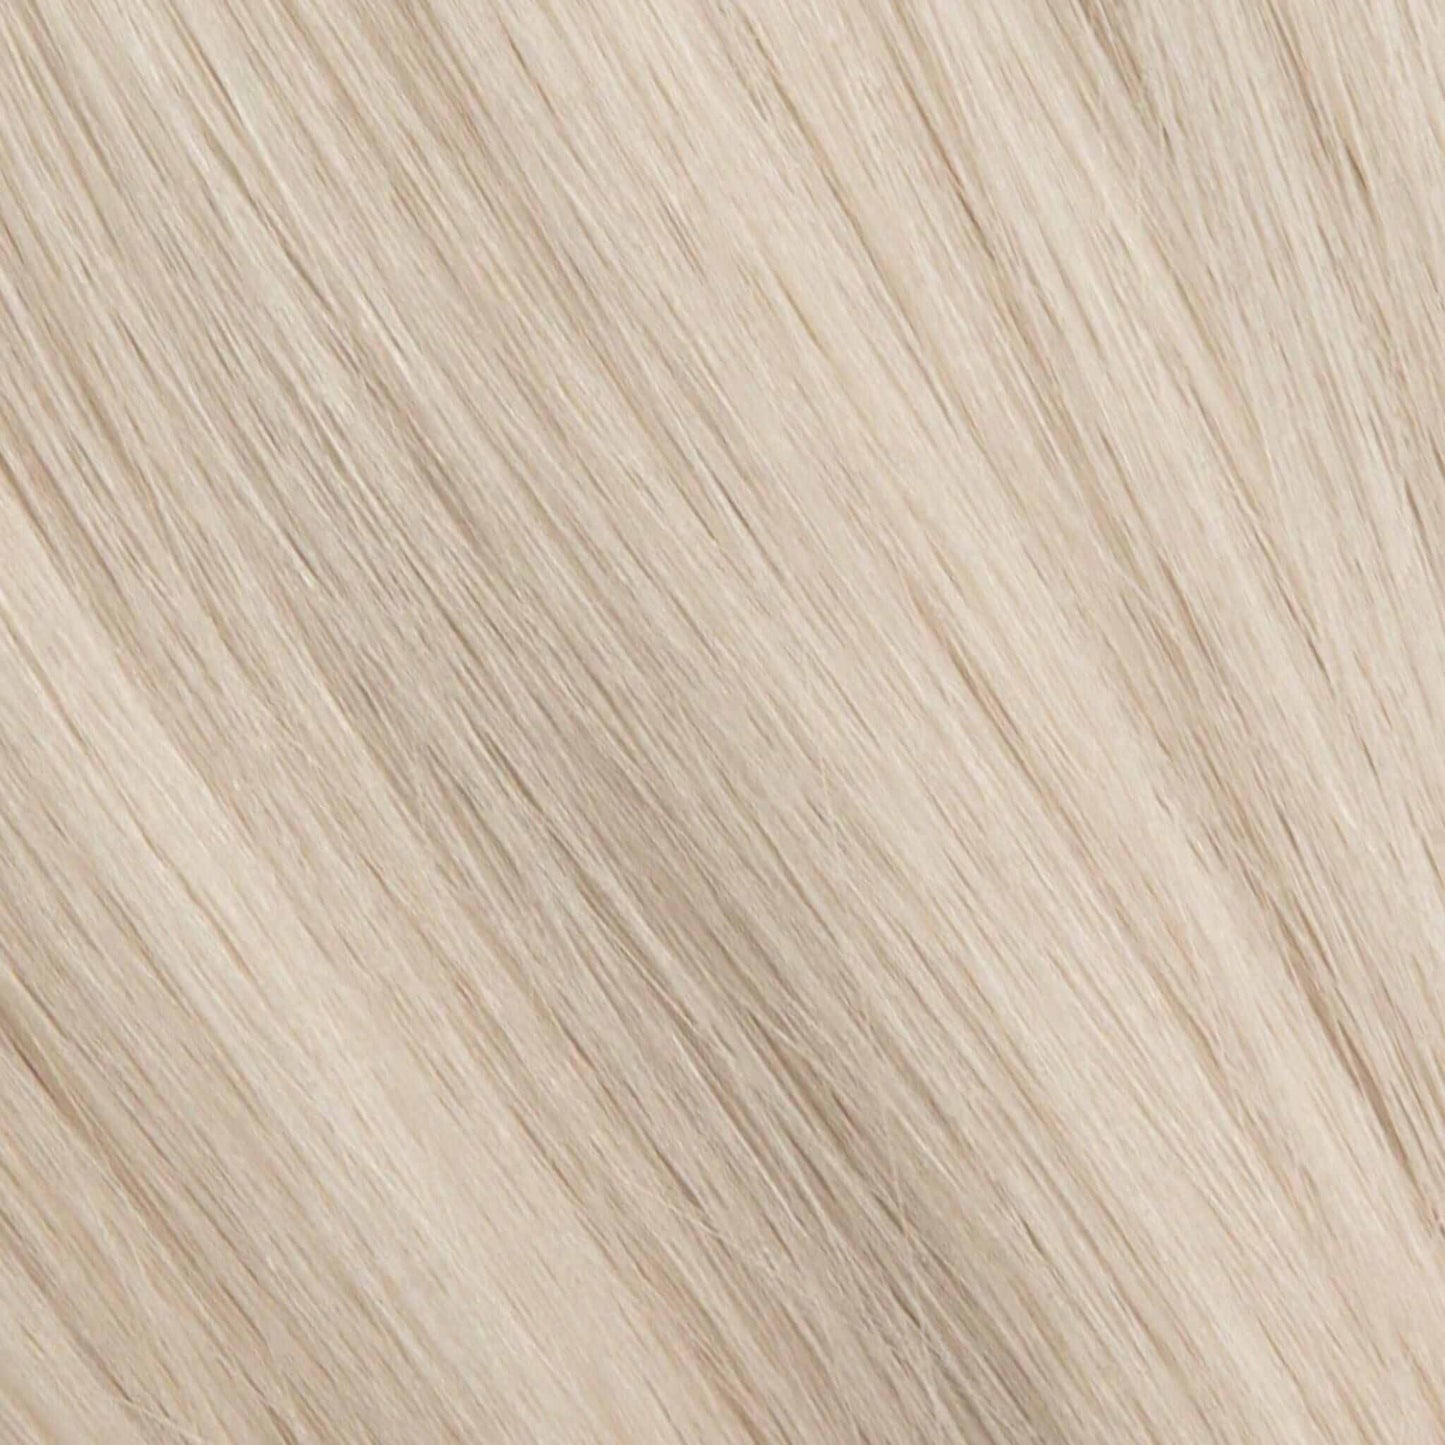 Tape-In 16" 50g Professional Hair Extensions - #80 White Blonde